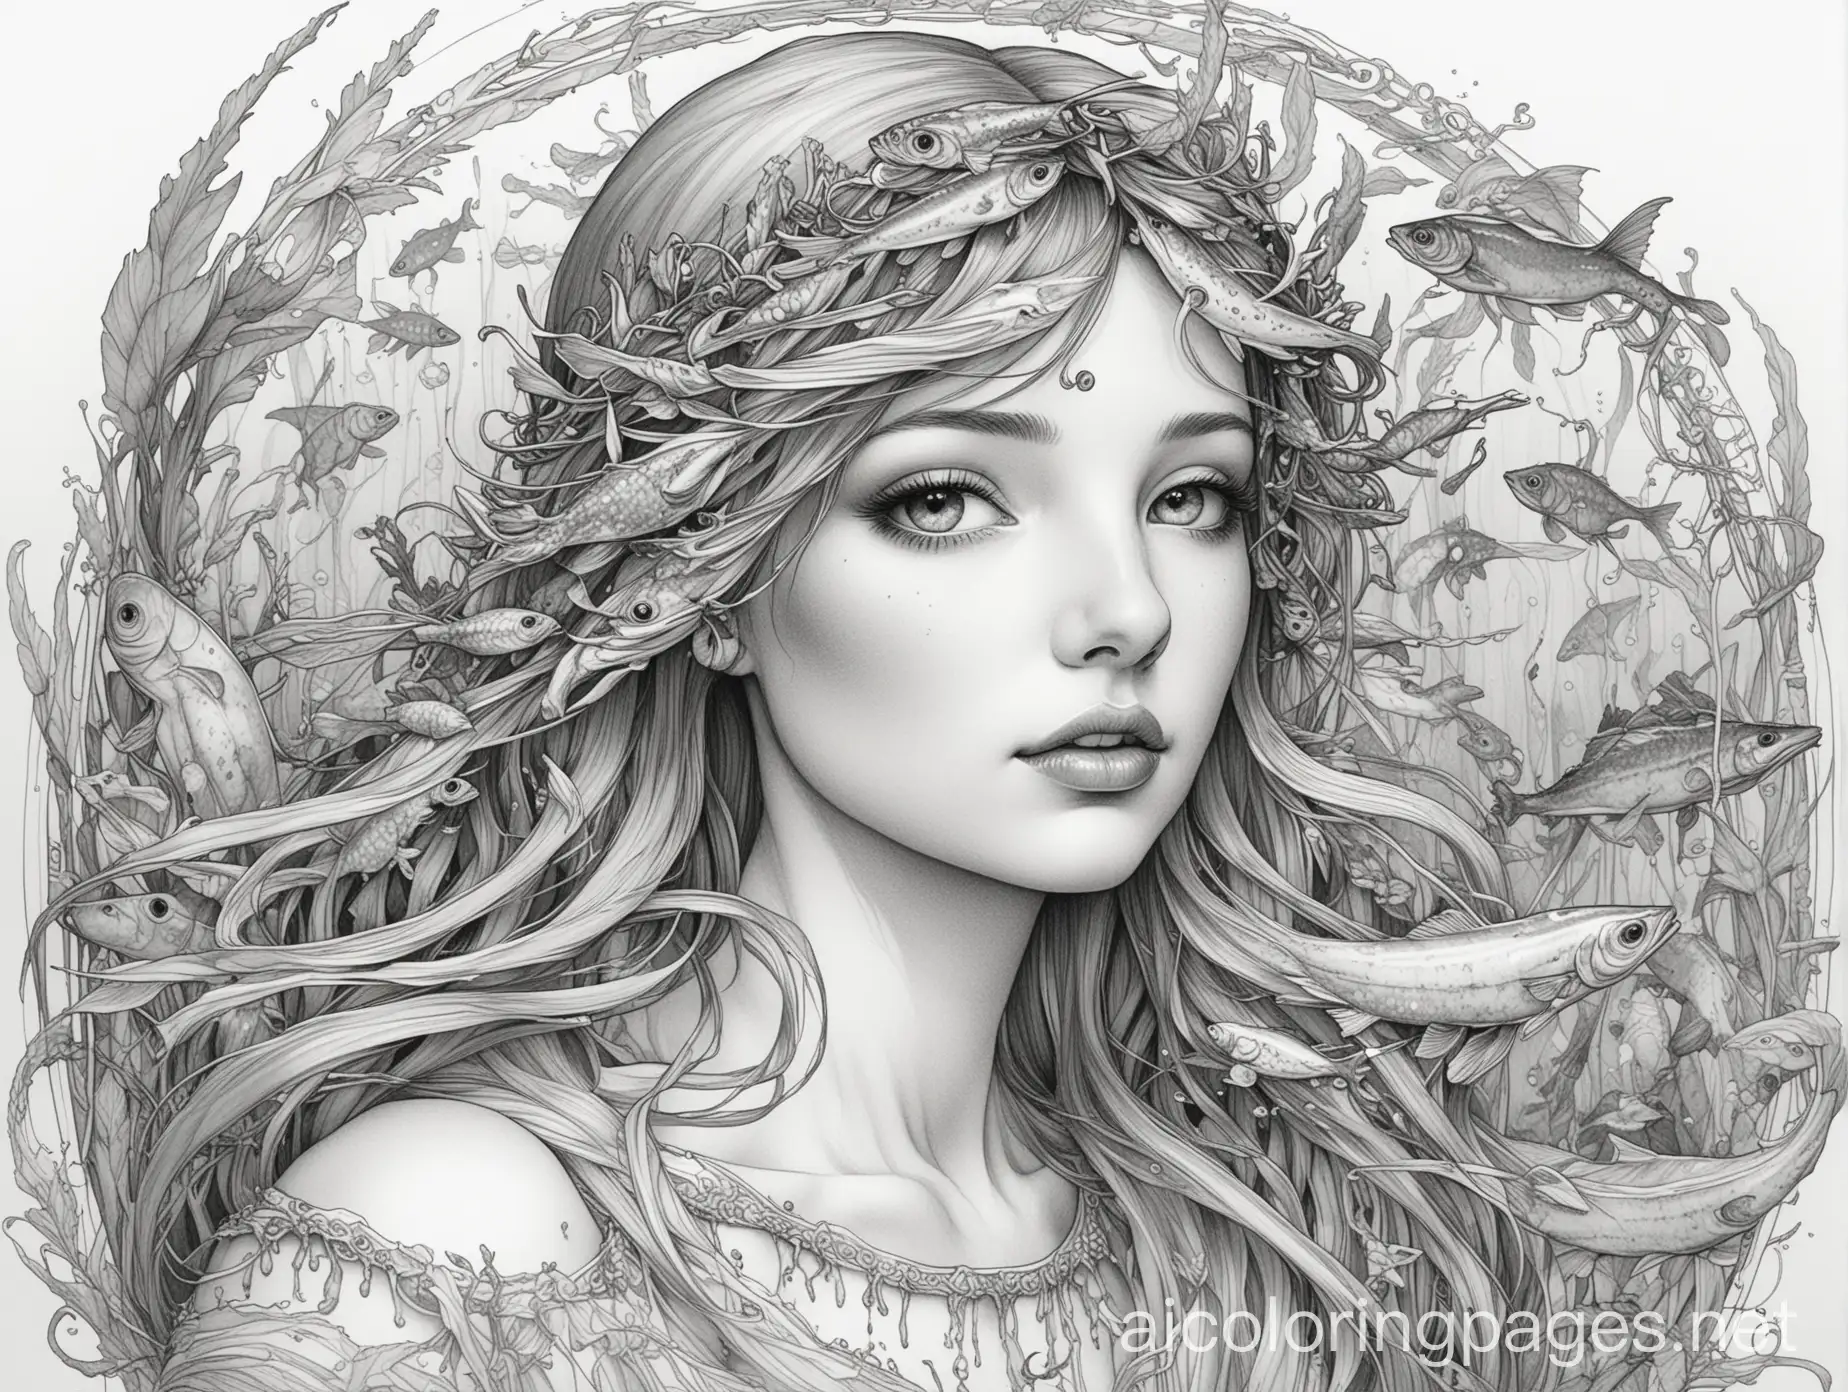 Graphic illustration, Anchovies, fantasy, ethereal, beautiful, Art Nouveau, in the style of Brian Froud, Coloring Page, black and white, line art, white background, Simplicity, Ample White Space. The background of the coloring page is plain white to make it easy for young children to color within the lines. The outlines of all the subjects are easy to distinguish, making it simple for kids to color without too much difficulty